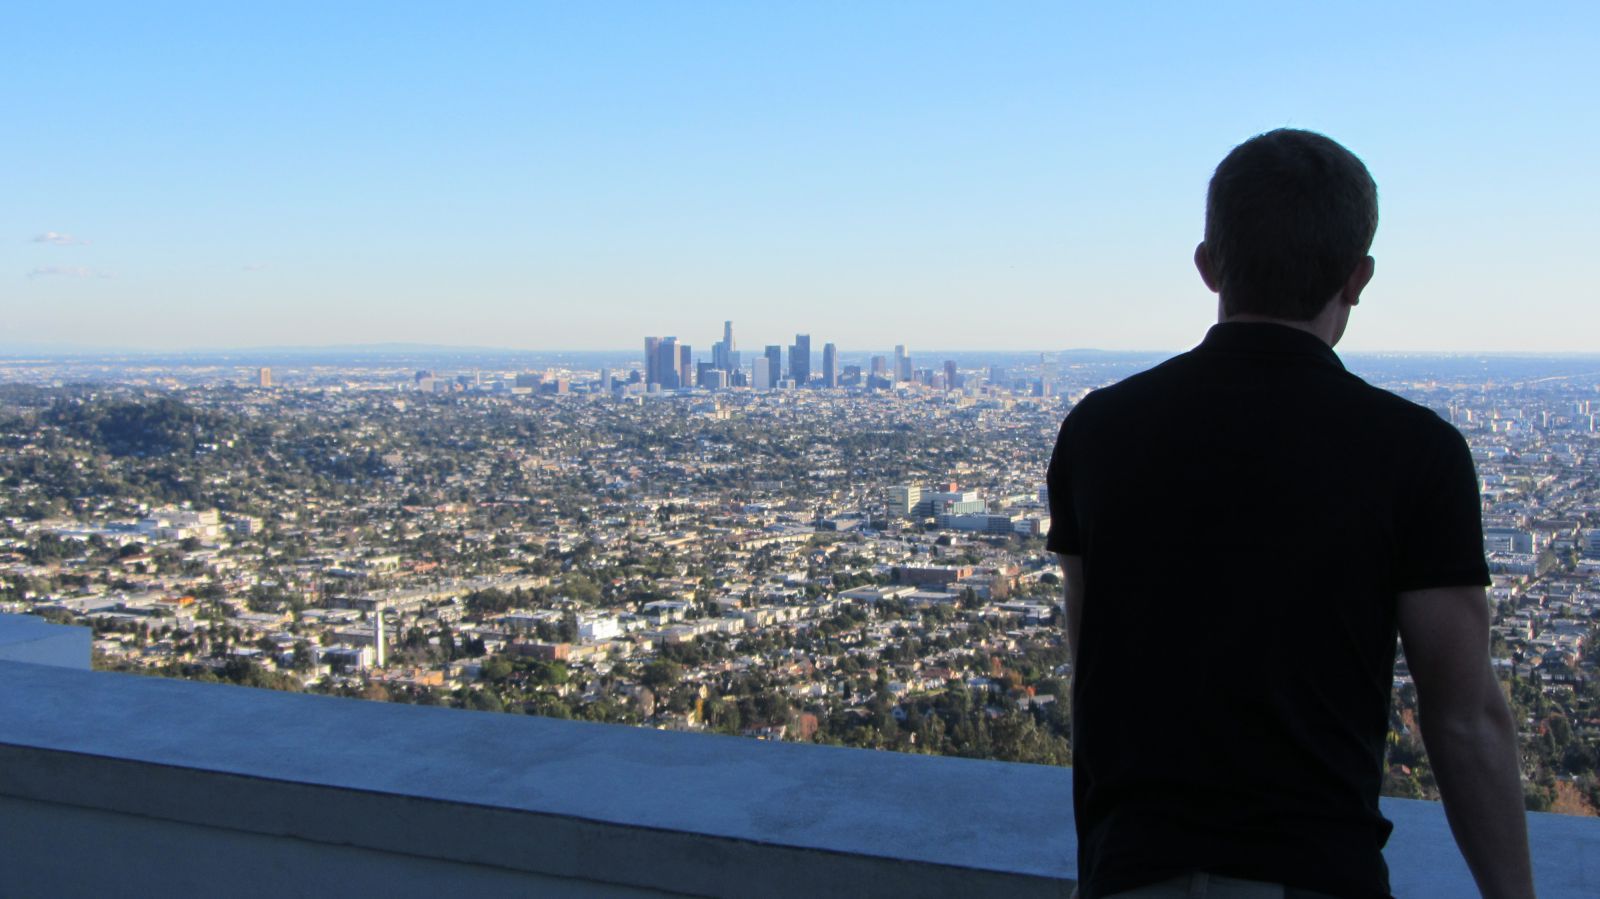 Student looking out over city skyline